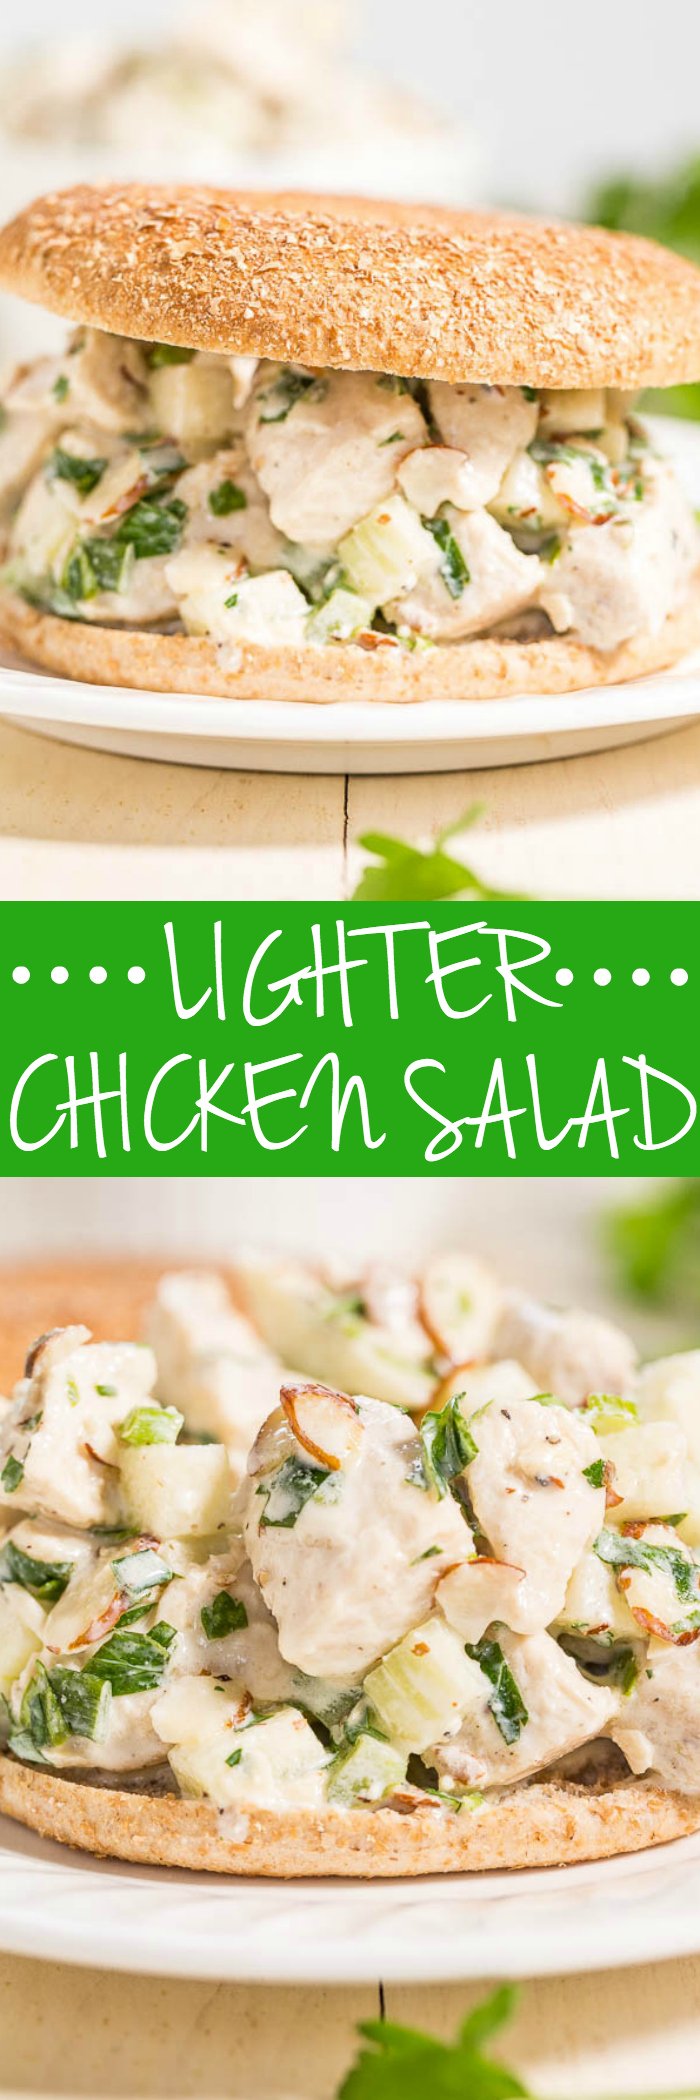 Healthy Chicken Salad — This healthy chicken salad recipe is made with Greek yogurt instead of mayo and is packed with flavor thanks to the green onions, apple, and spices.